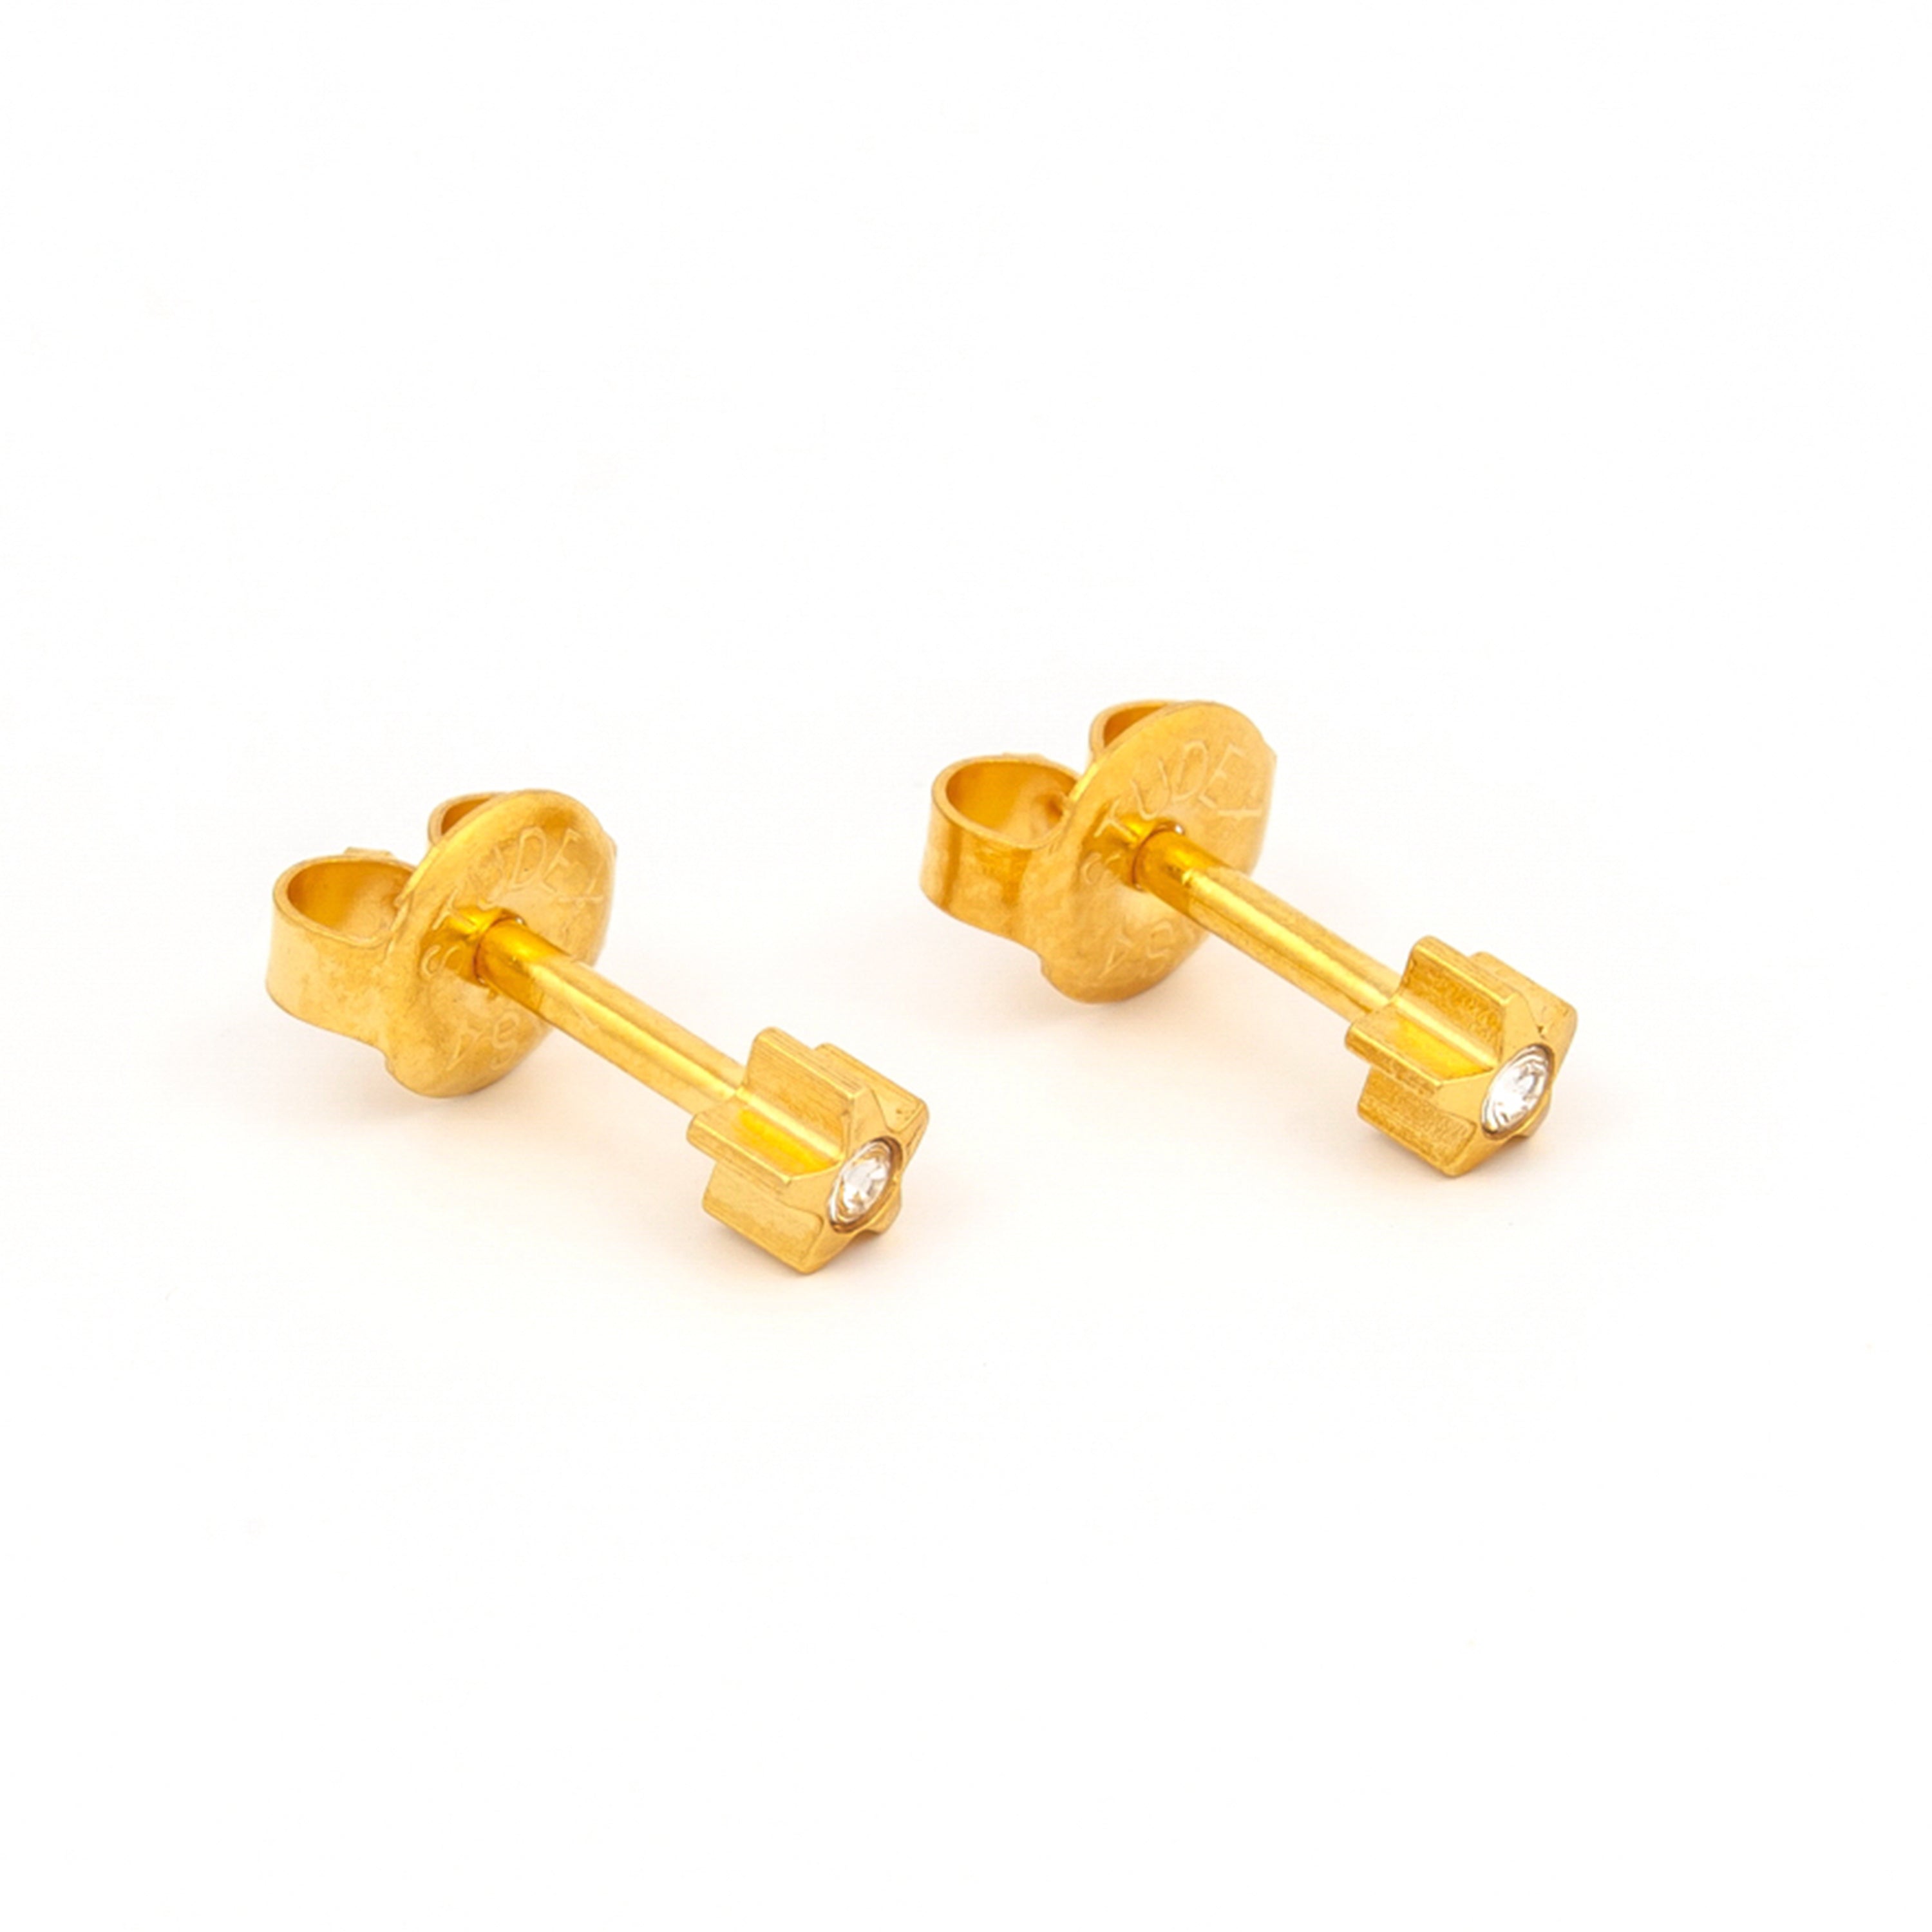 3MM Star 24K Pure Gold Plated Ear Studs | MADE IN USA | Ideal for everyday wear